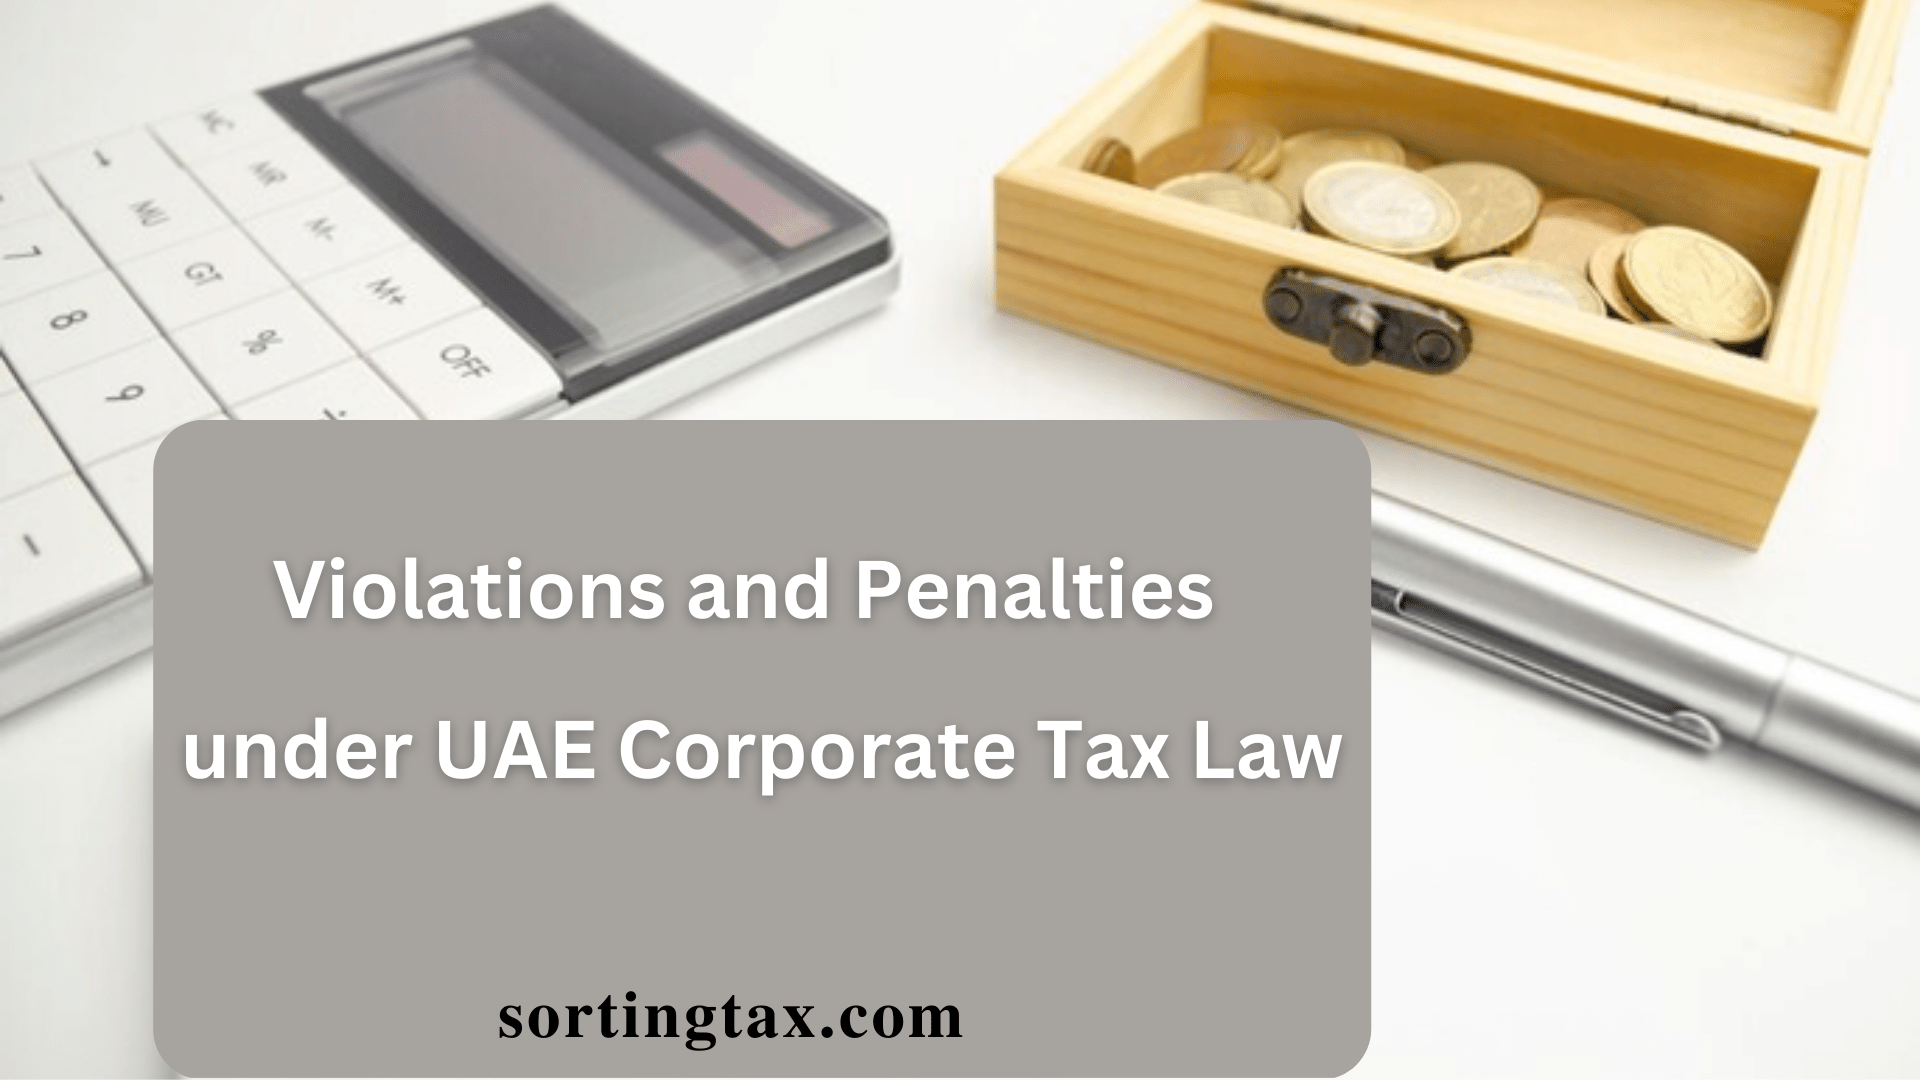 Violations and Penalties under UAE Corporate Tax Law